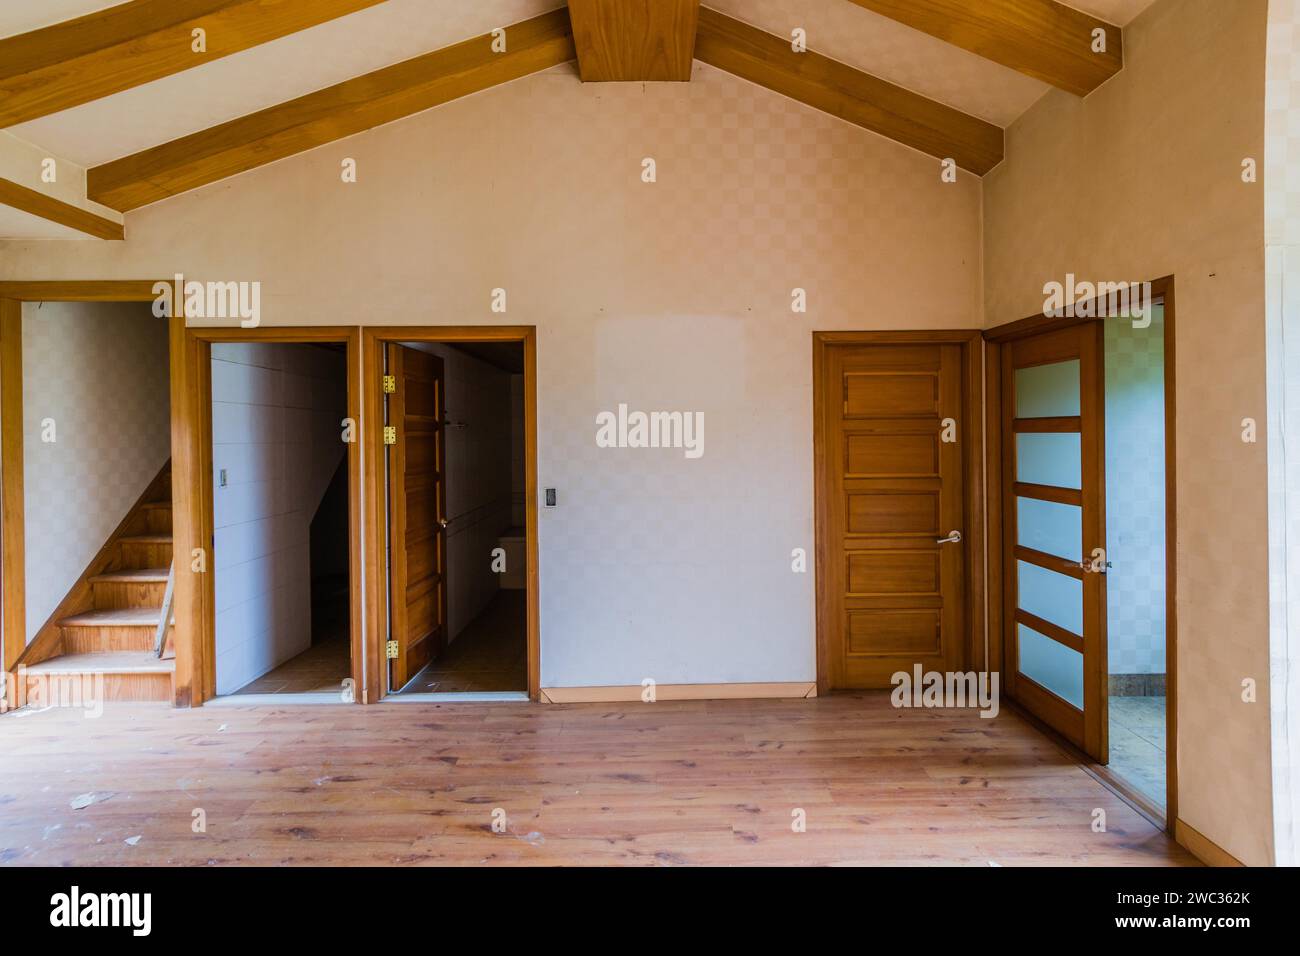 Living room with wood beam ceiling and doors leading to other rooms in two story abandoned house Stock Photo